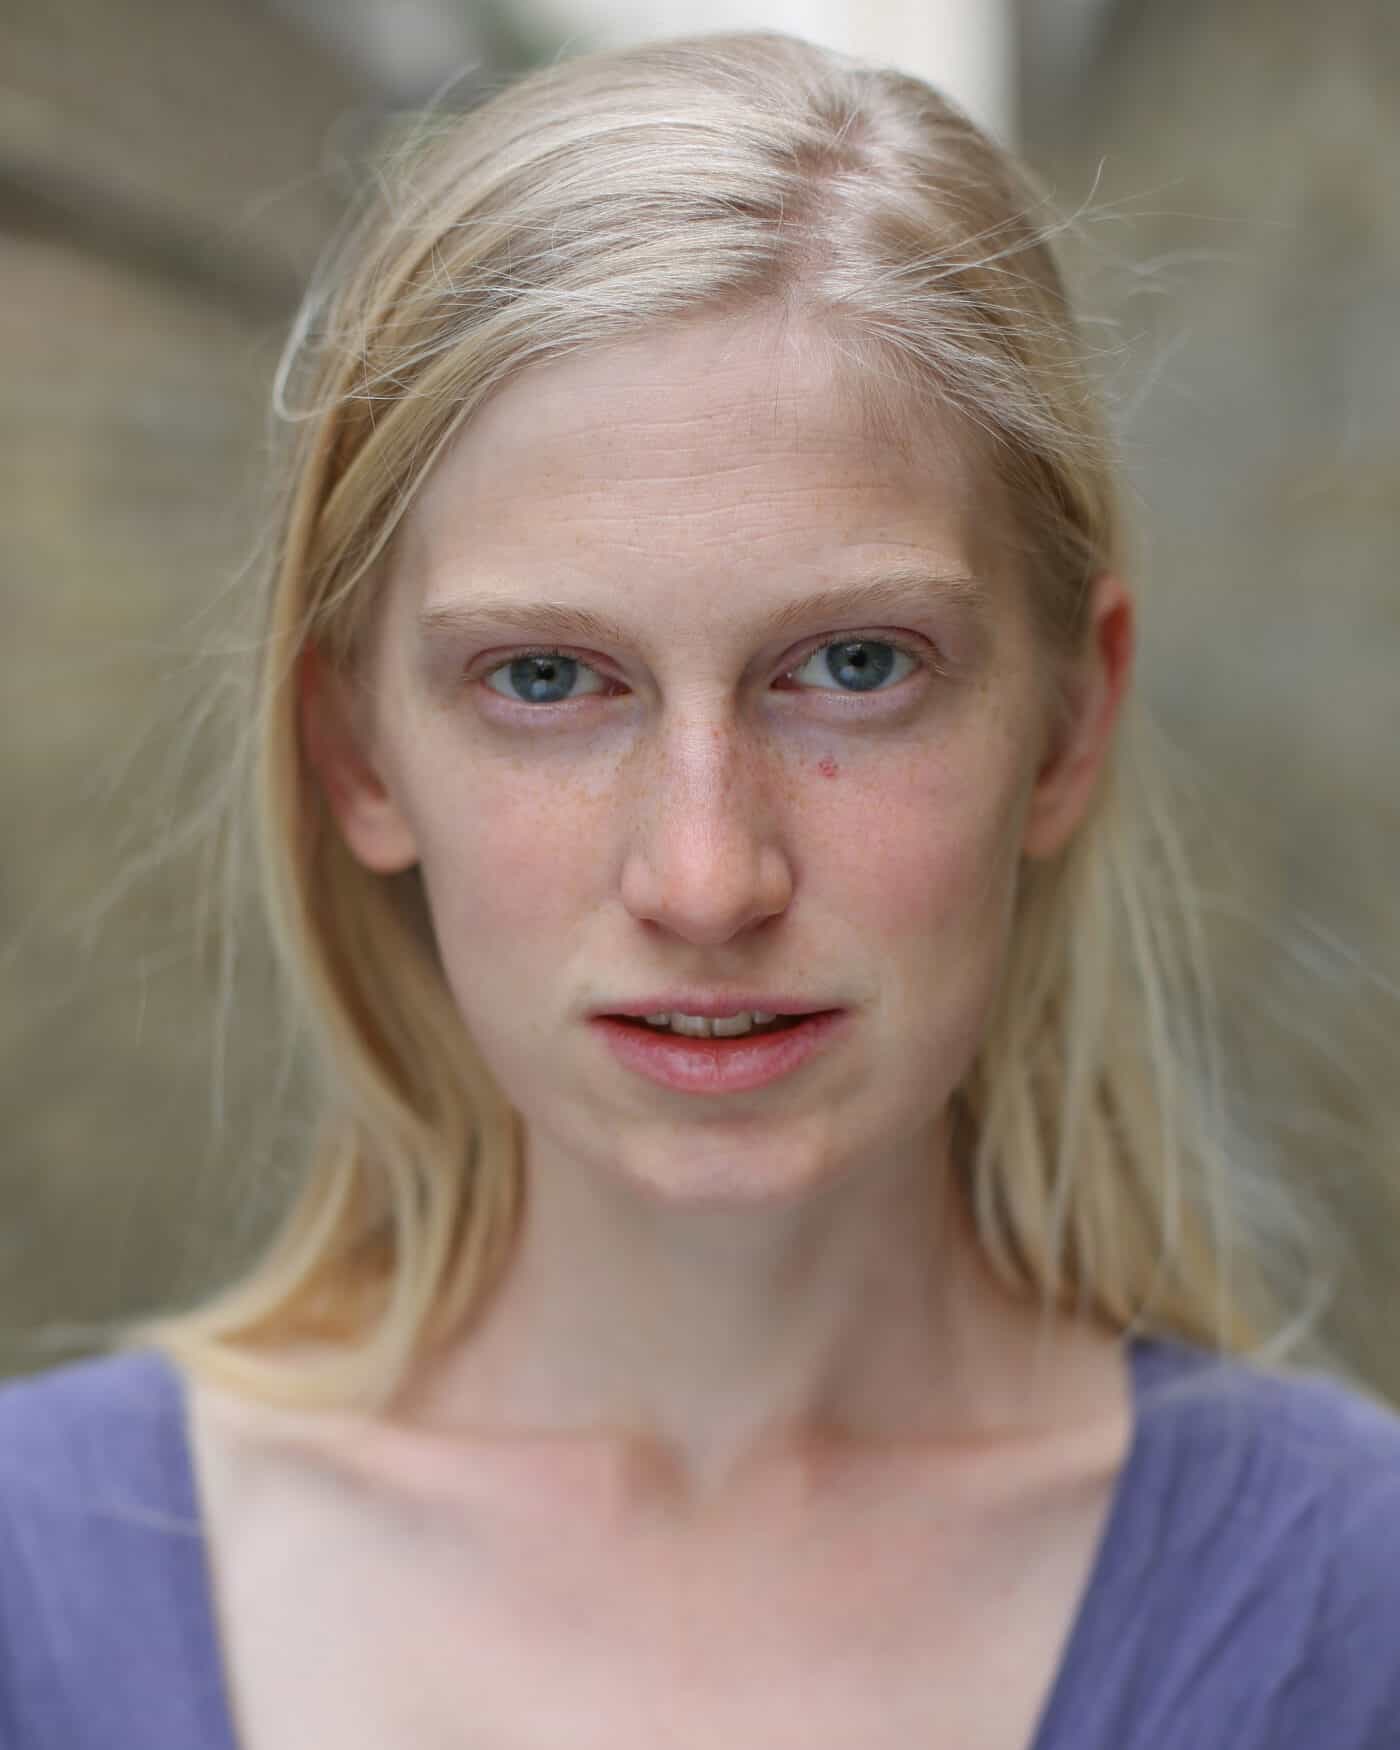 An image of Nell Hardy. A pale white woman in her early thirties with long blonde hair, blue eyes and freckles, wearing a pale purple top, smiles slightly in front of a blurred alleyway in the background.